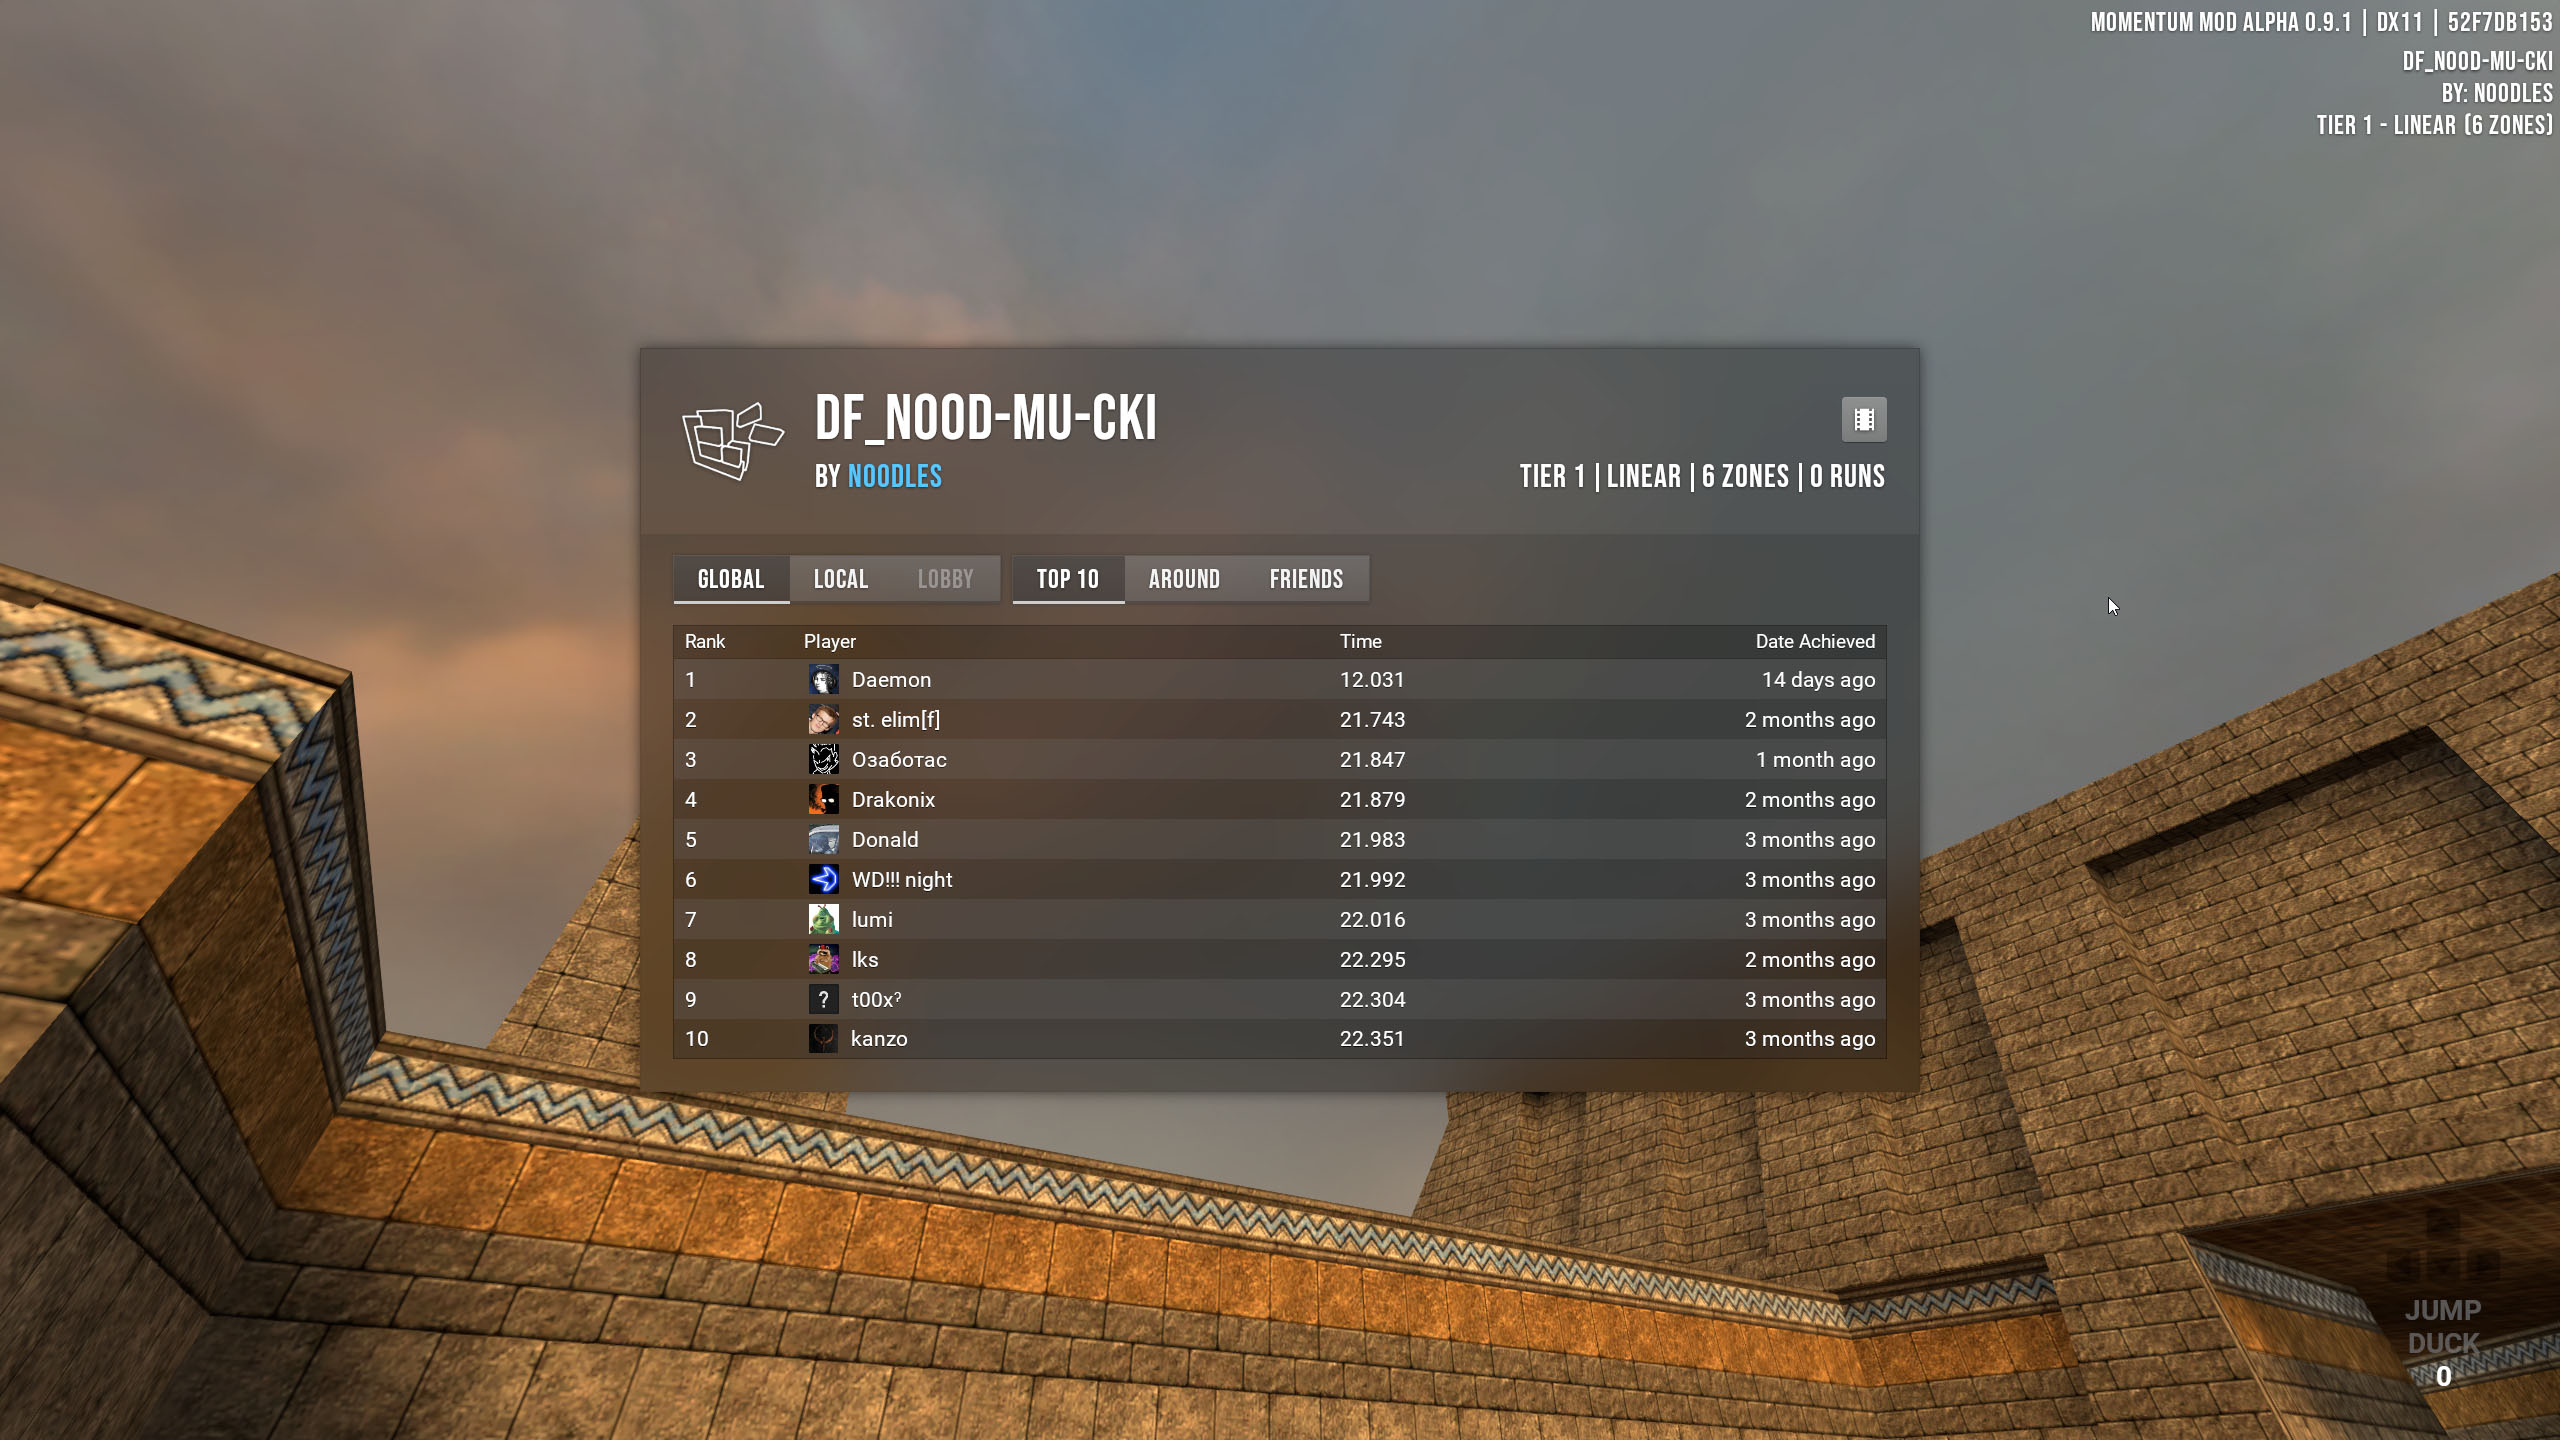 Momentum Mod's new in-game UI displaying the leaderboards